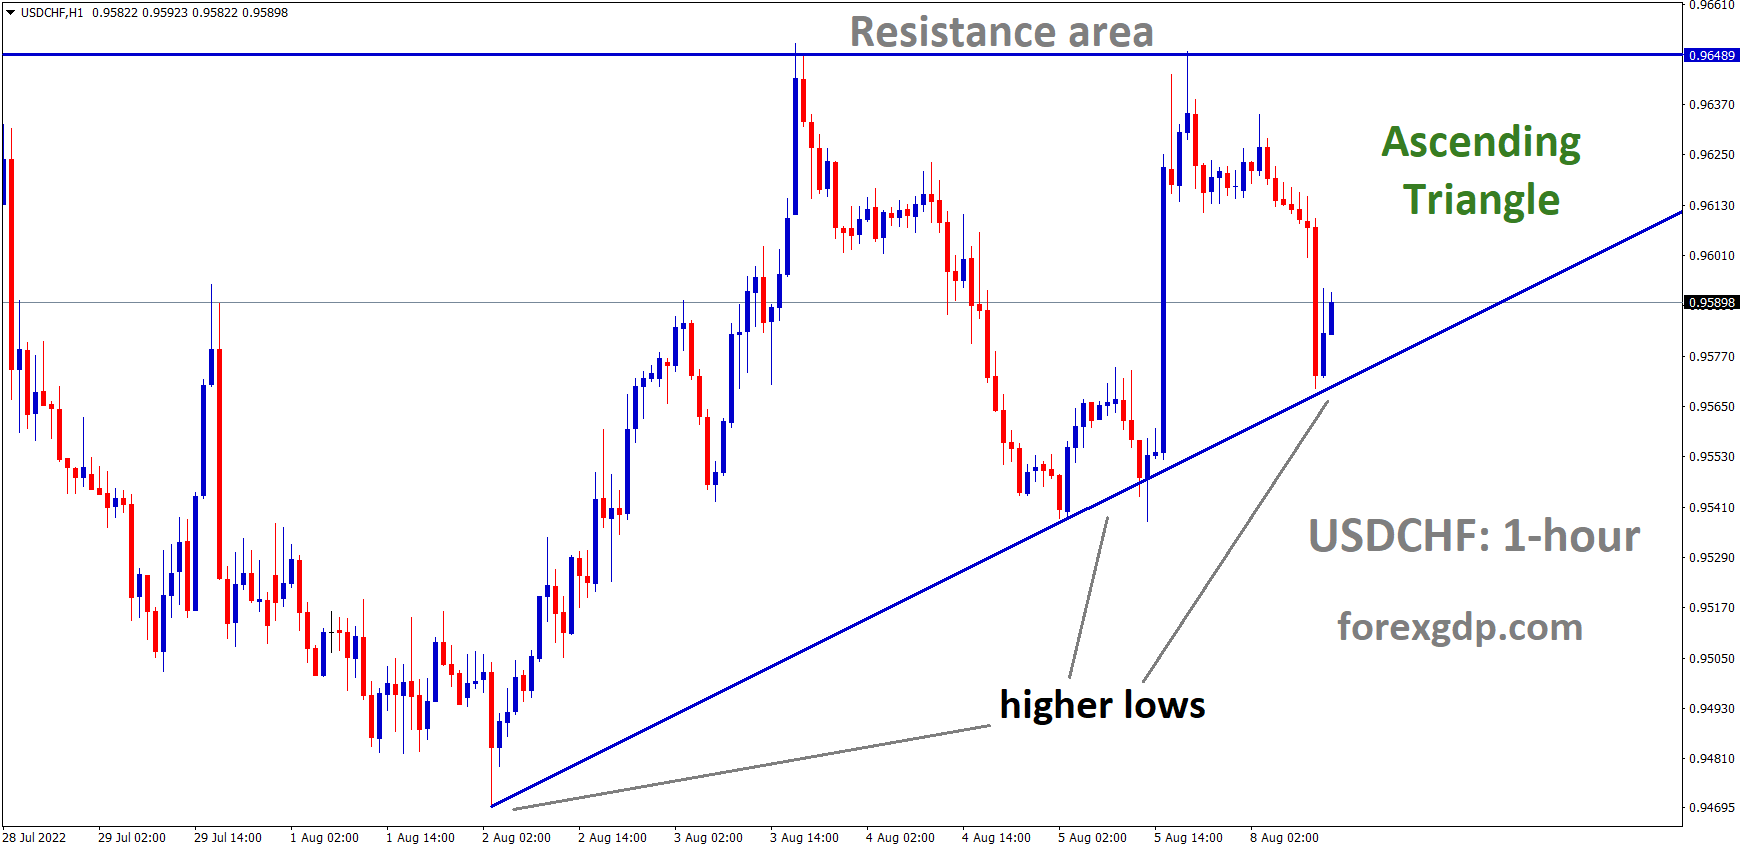 USDCHF is moving in an Ascending triangle pattern and the Market has rebounded from the higher low area of the Pattern